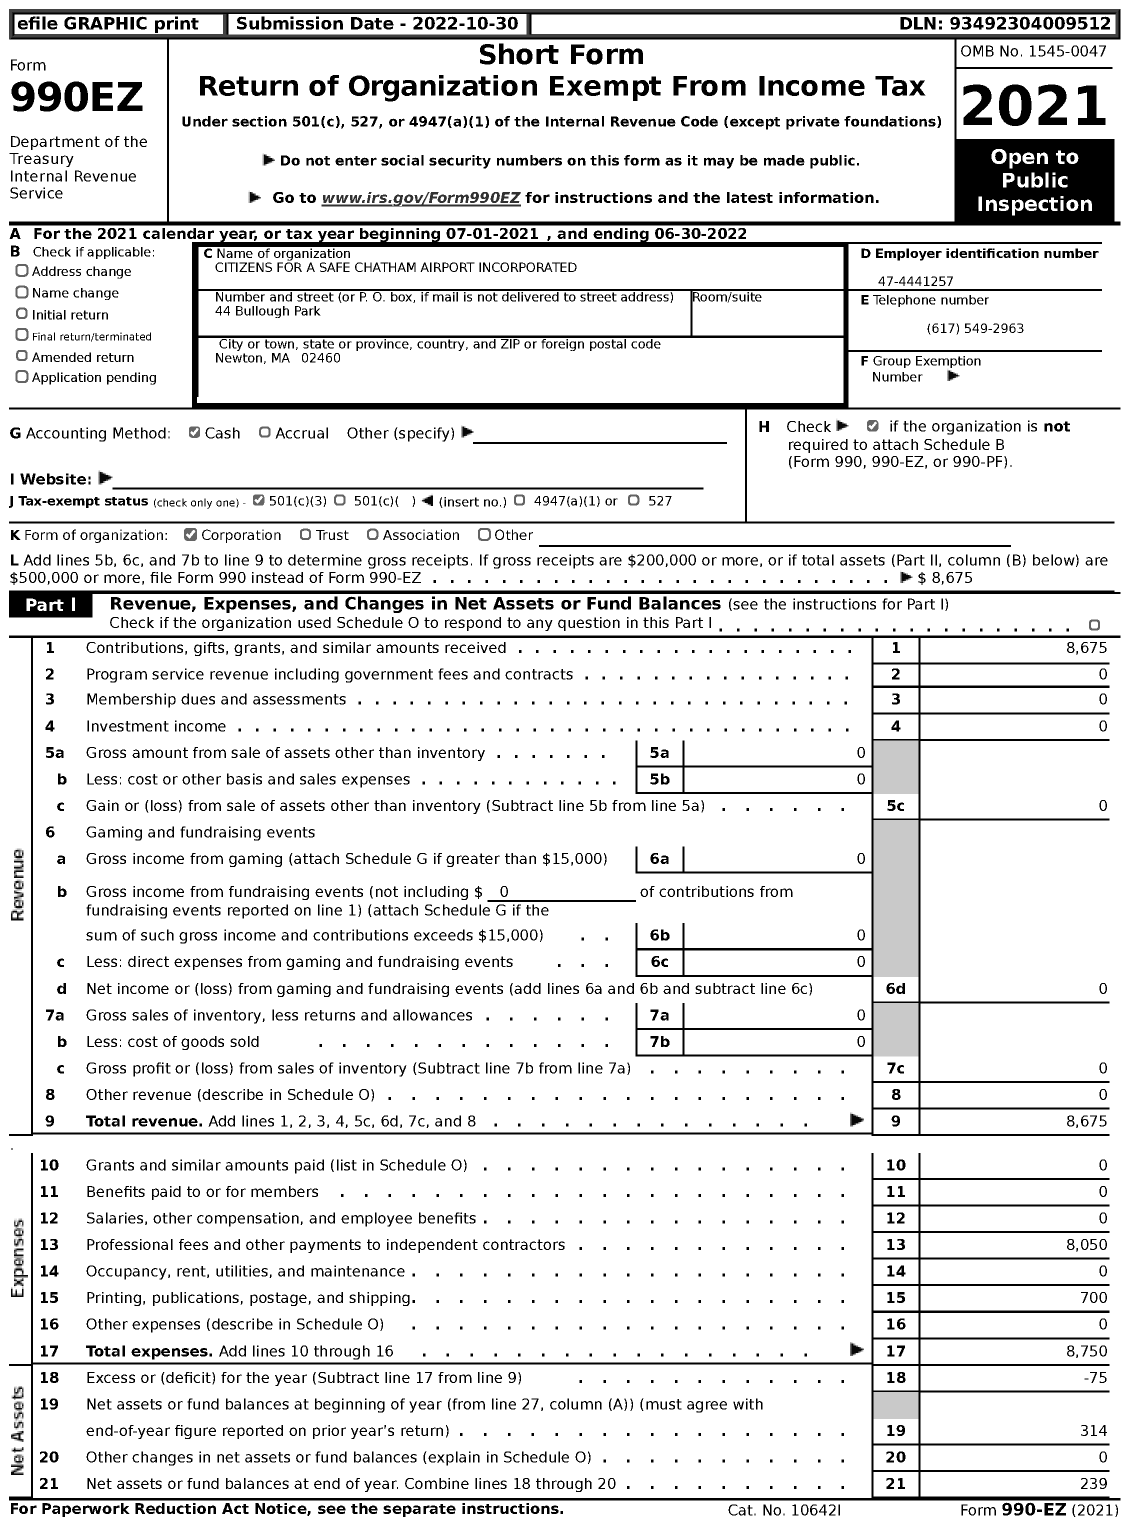 Image of first page of 2021 Form 990EZ for Citizens for A Safe Chatham Airport Incorporated